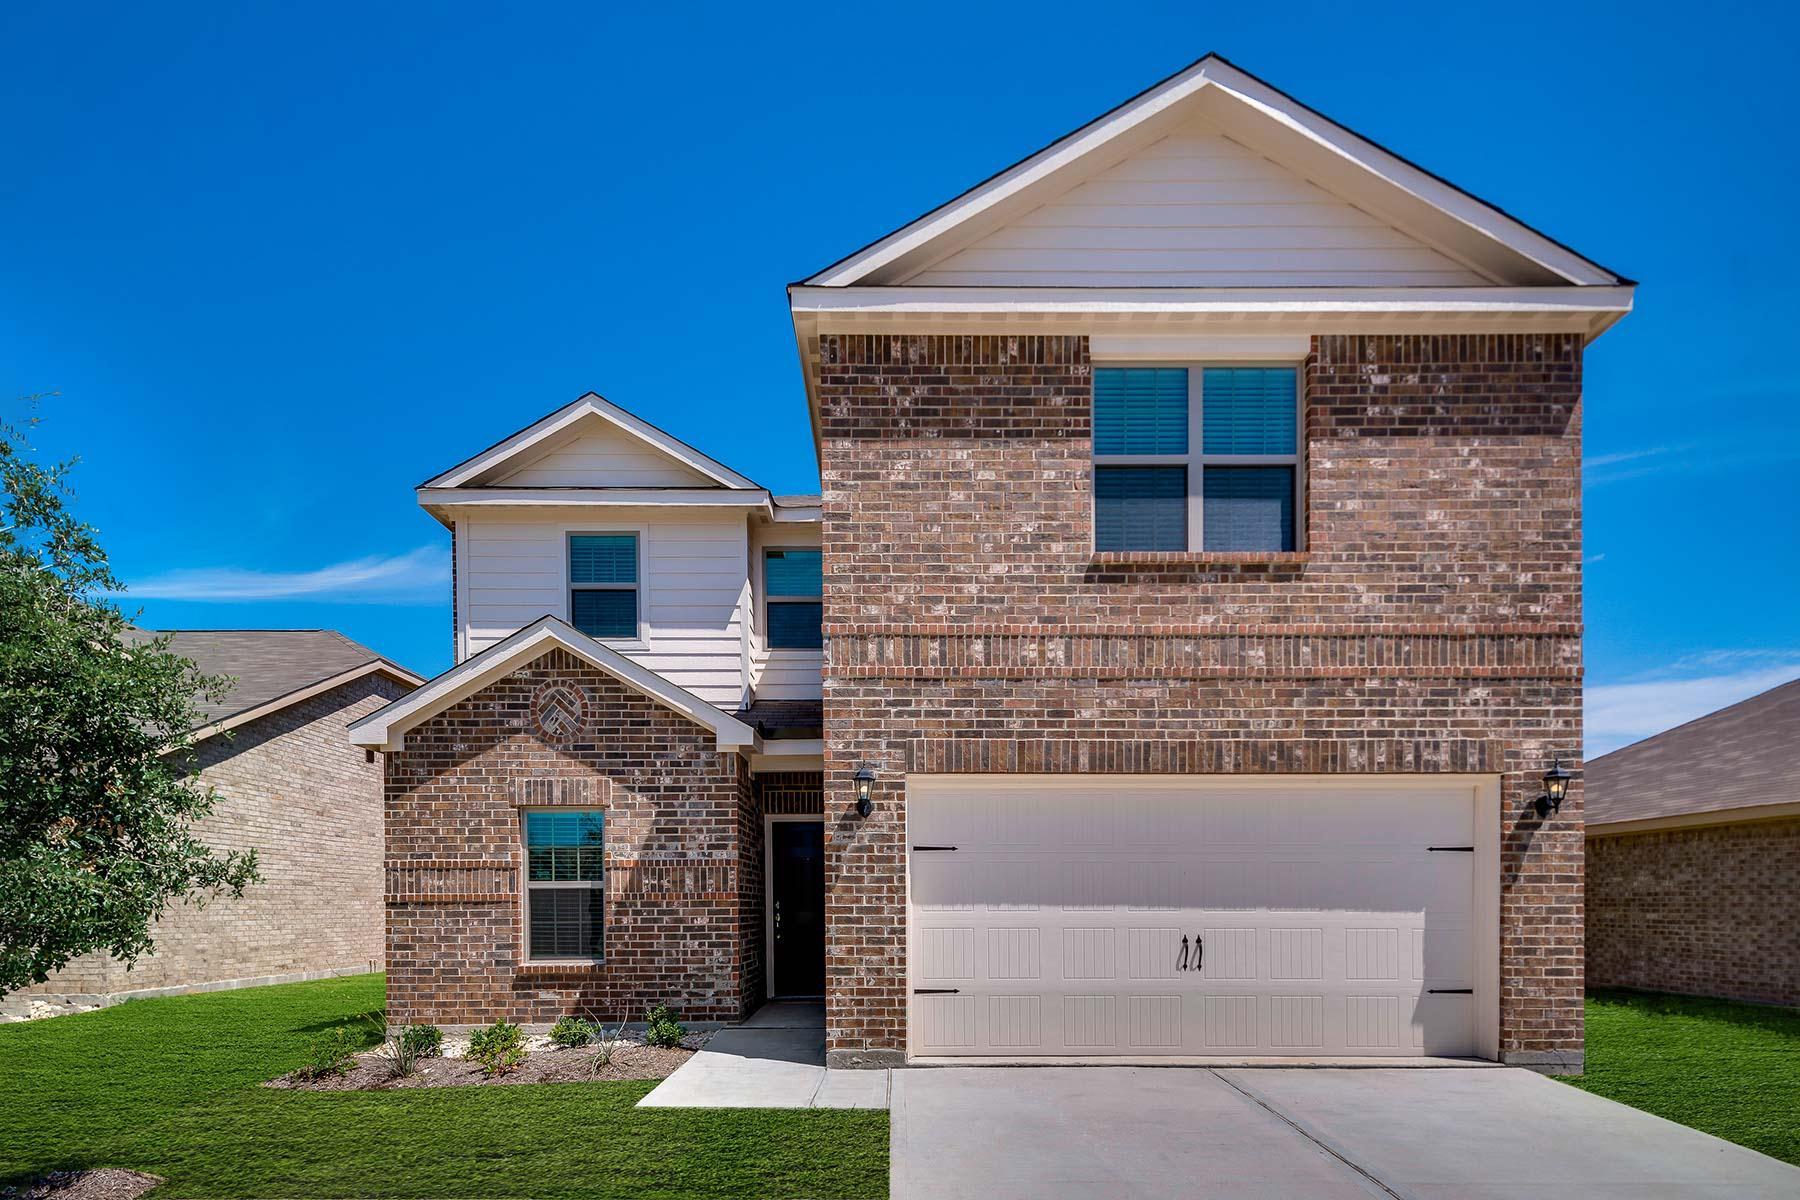 Driftwood Plan at Windmill Farms in Forney, TX by LGI Homes